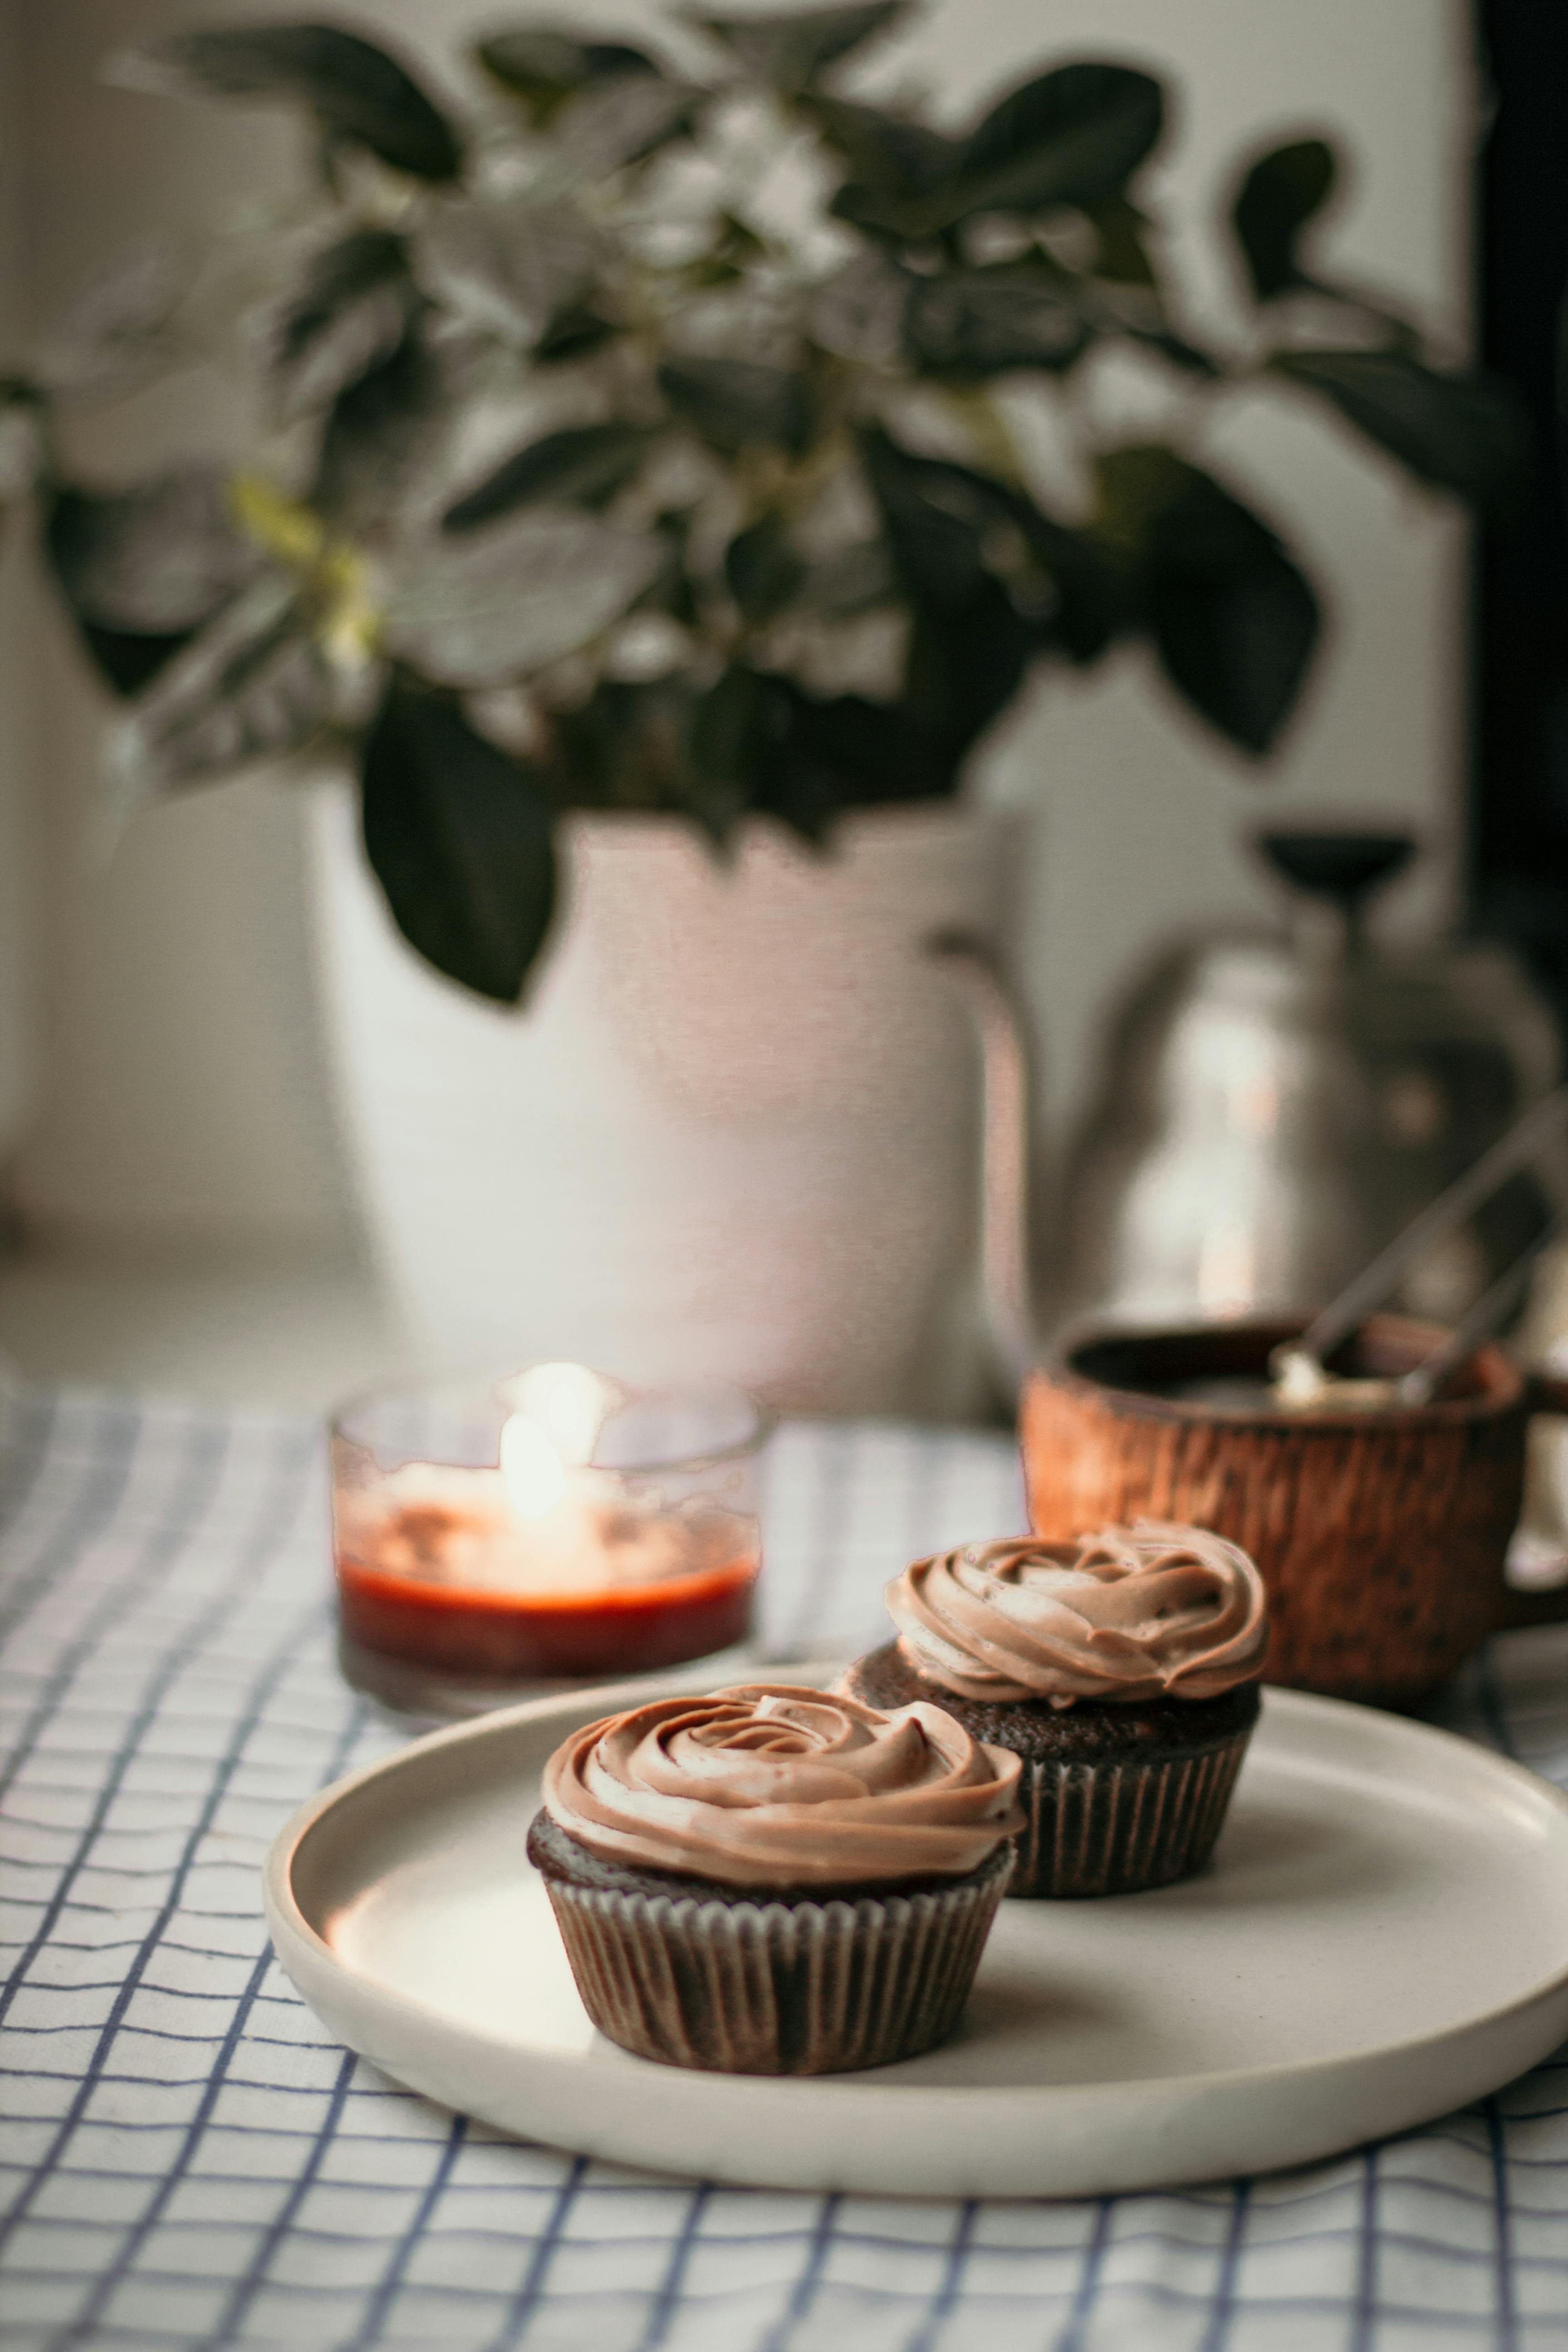 delicious chocolate cupcakes with cream on plate